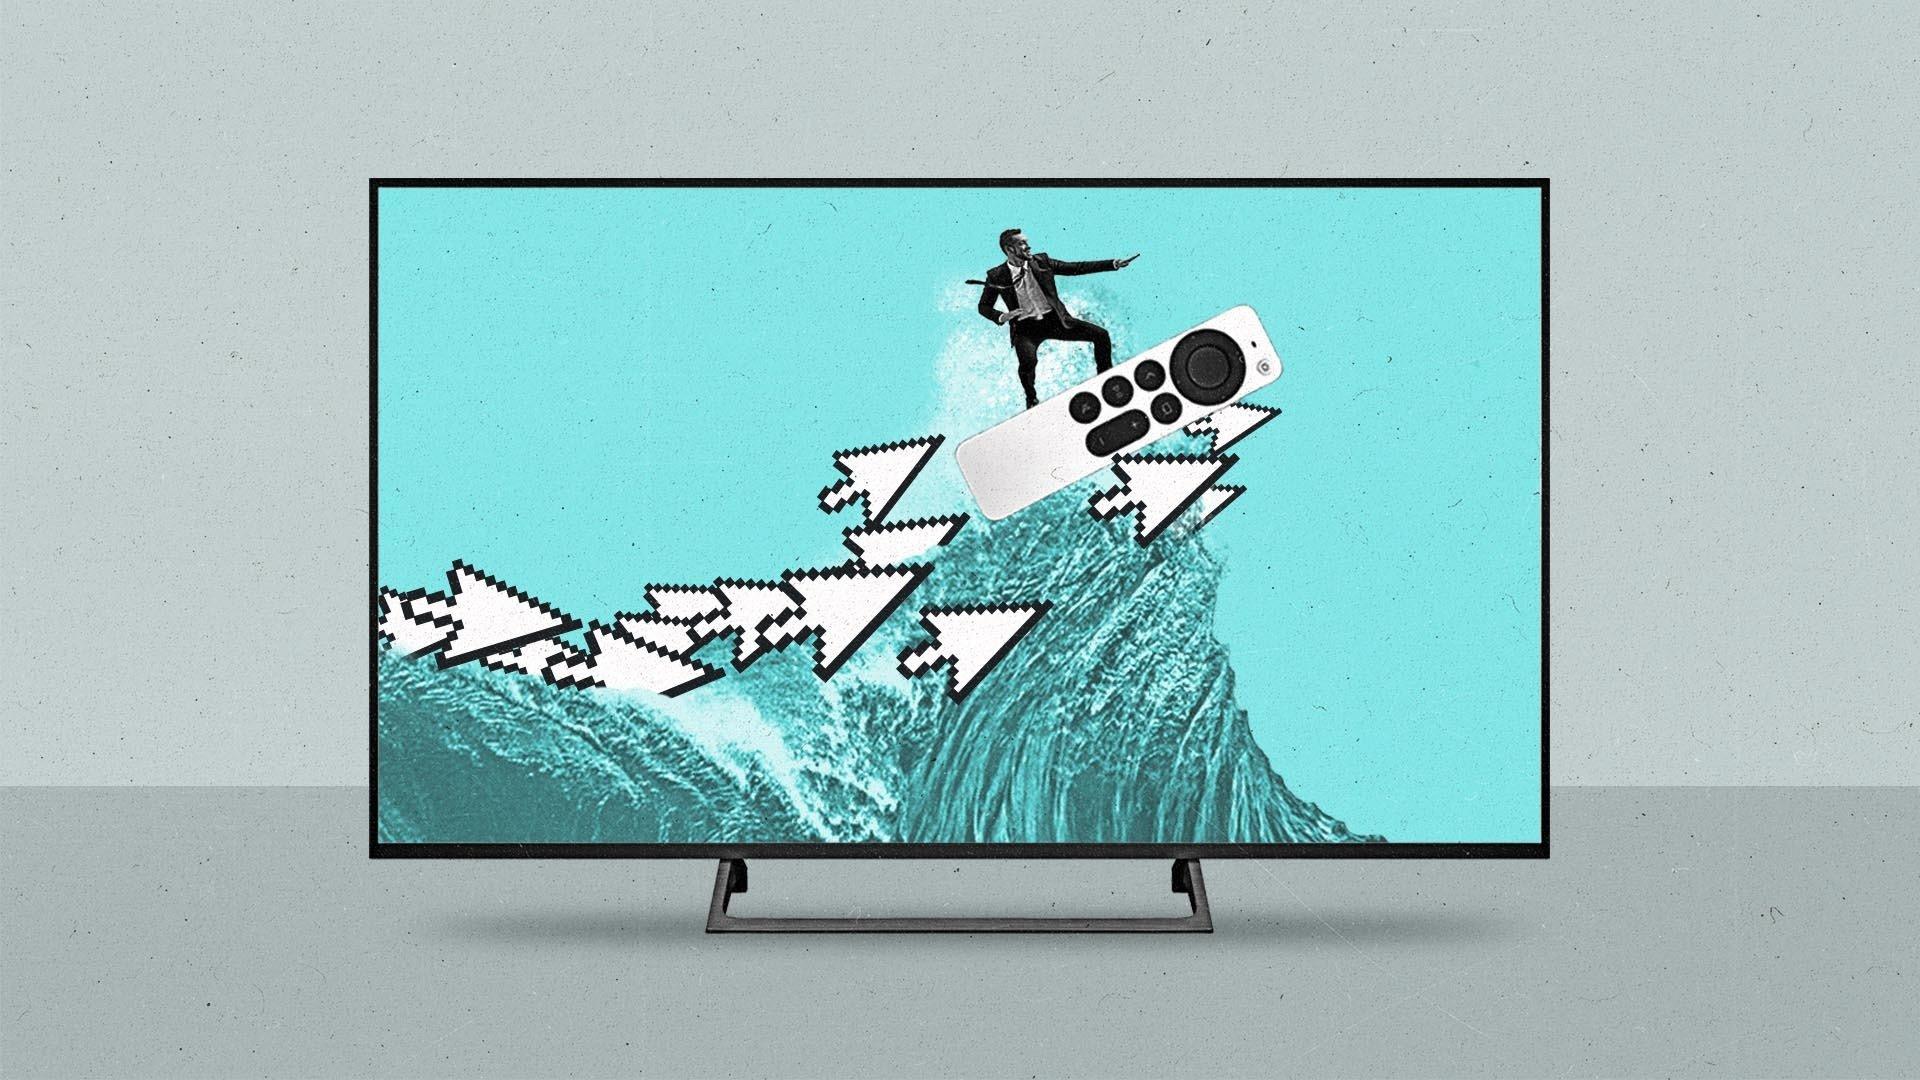 A man rides a connected TV remote on a wave of cursor arrows on a connected TV.